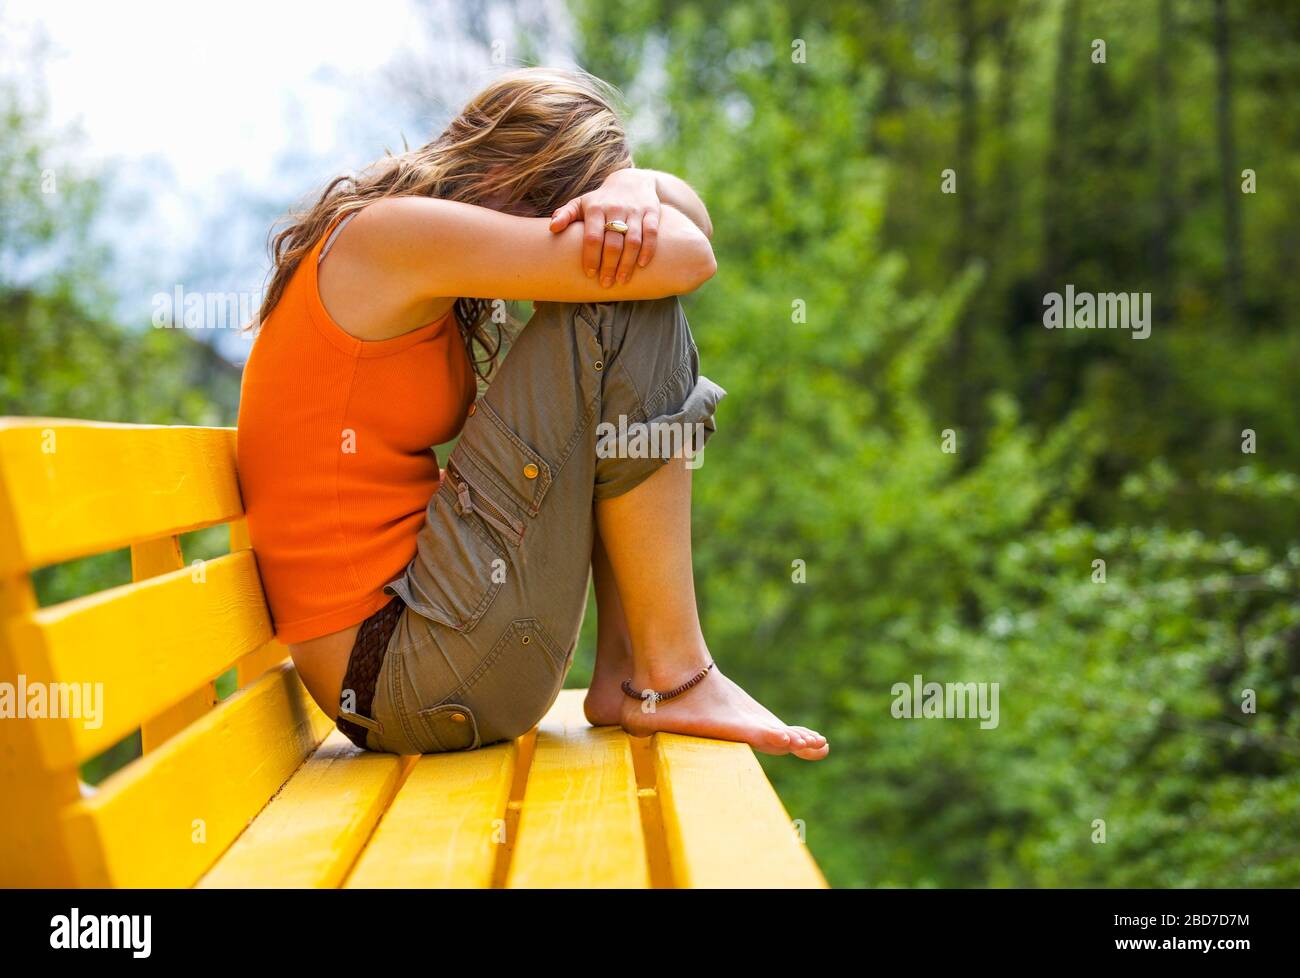 Young woman sitting sad and huddled on a bench, Depression, 22 years, Austria Stock Photo